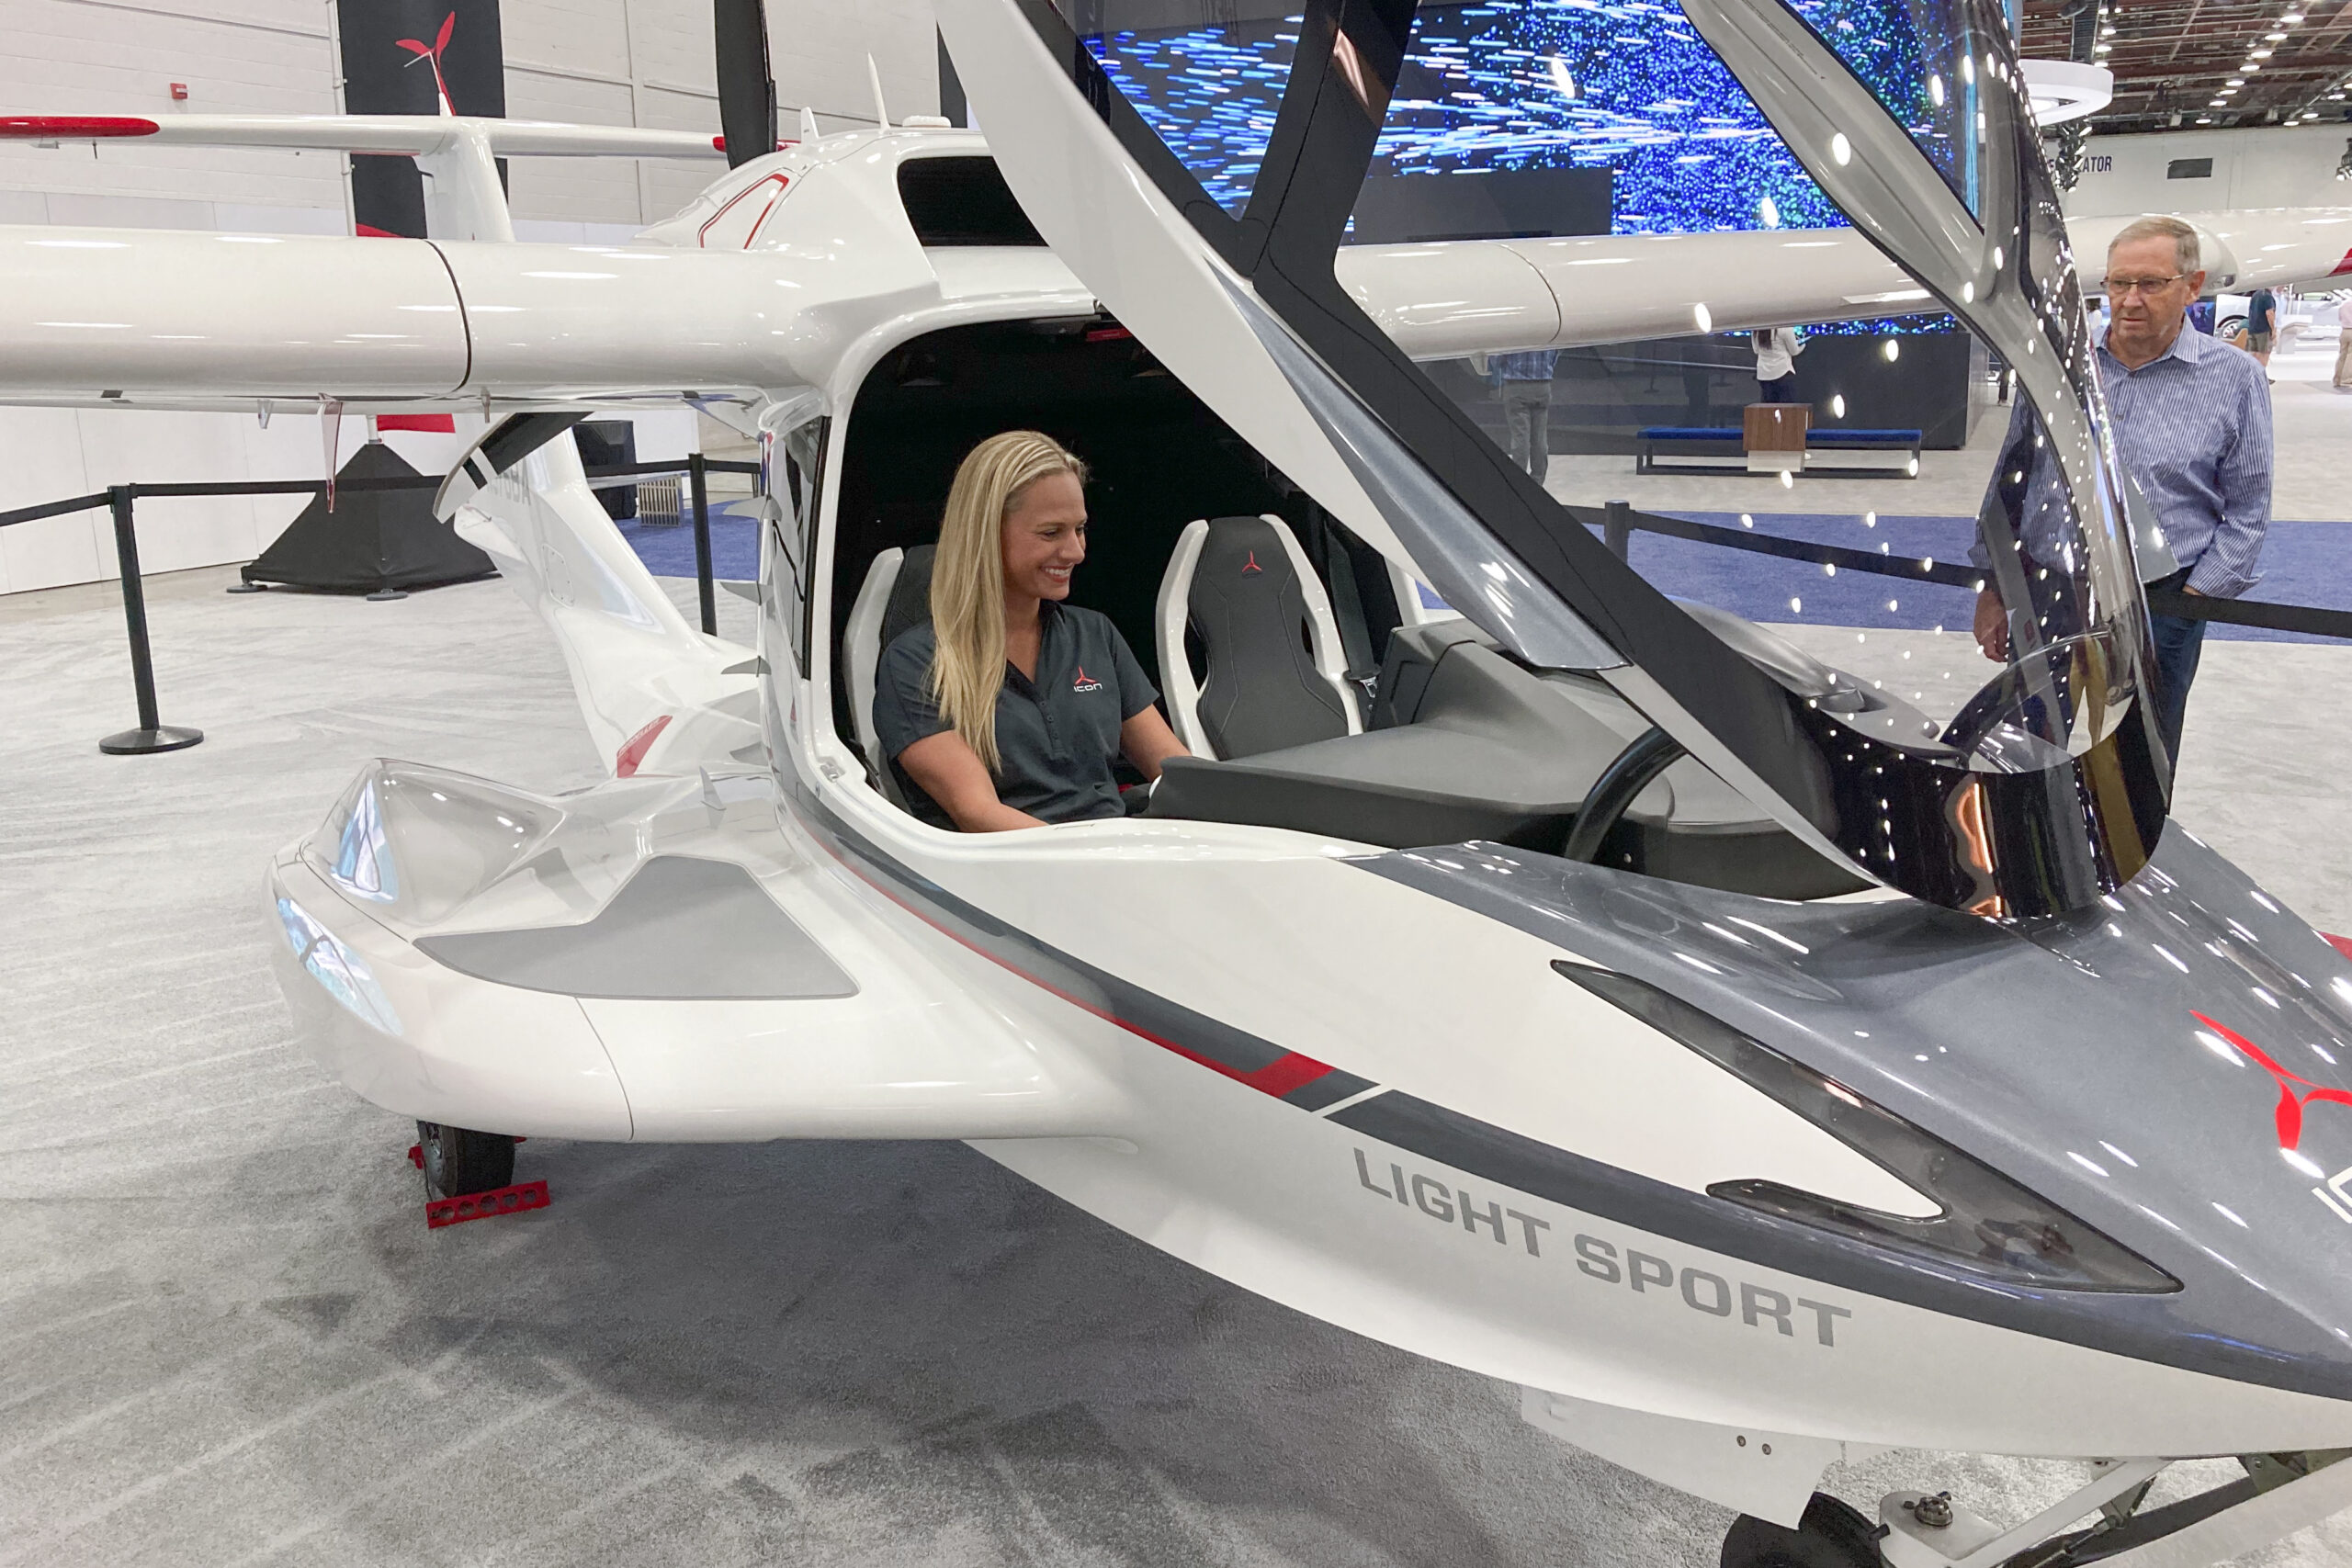 Suzanne Clavette, ICON Aircraft's marketing manager and a pilot, sits in an ICON A5 aircraft on the floor of the North American International Auto Show in Detroit, on Monday, Sept. 19, 2022. ICON Aircraft is one of the companies displaying their flying vehicles at NAIAS as part of the show's Air Mobility Experience segment. (AP Photo/Mike Householder)